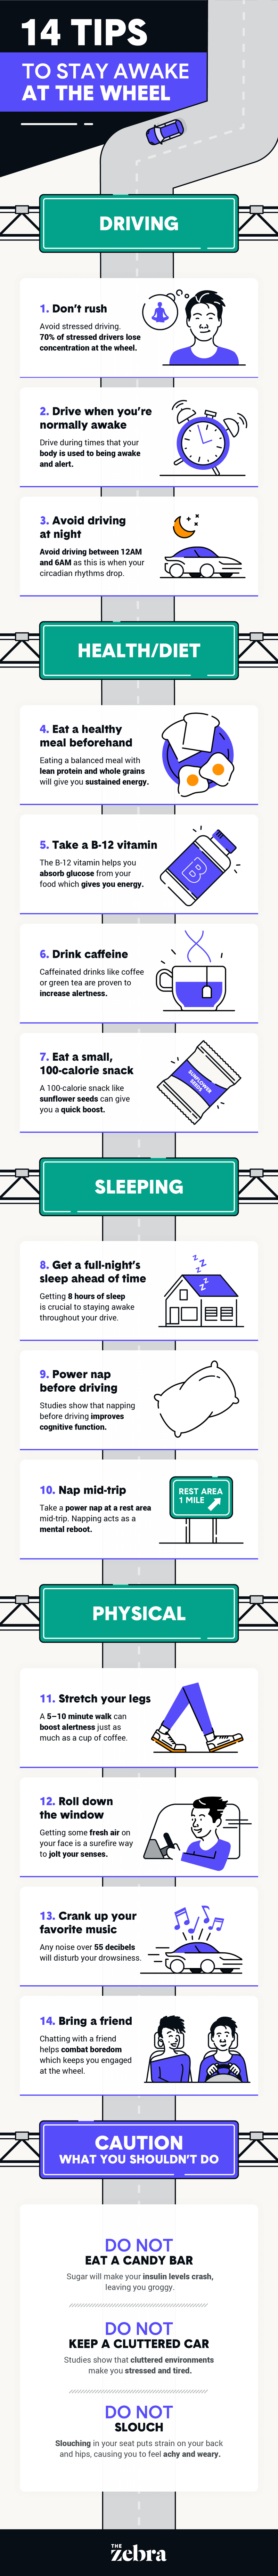 how to stay awake while driving infographic